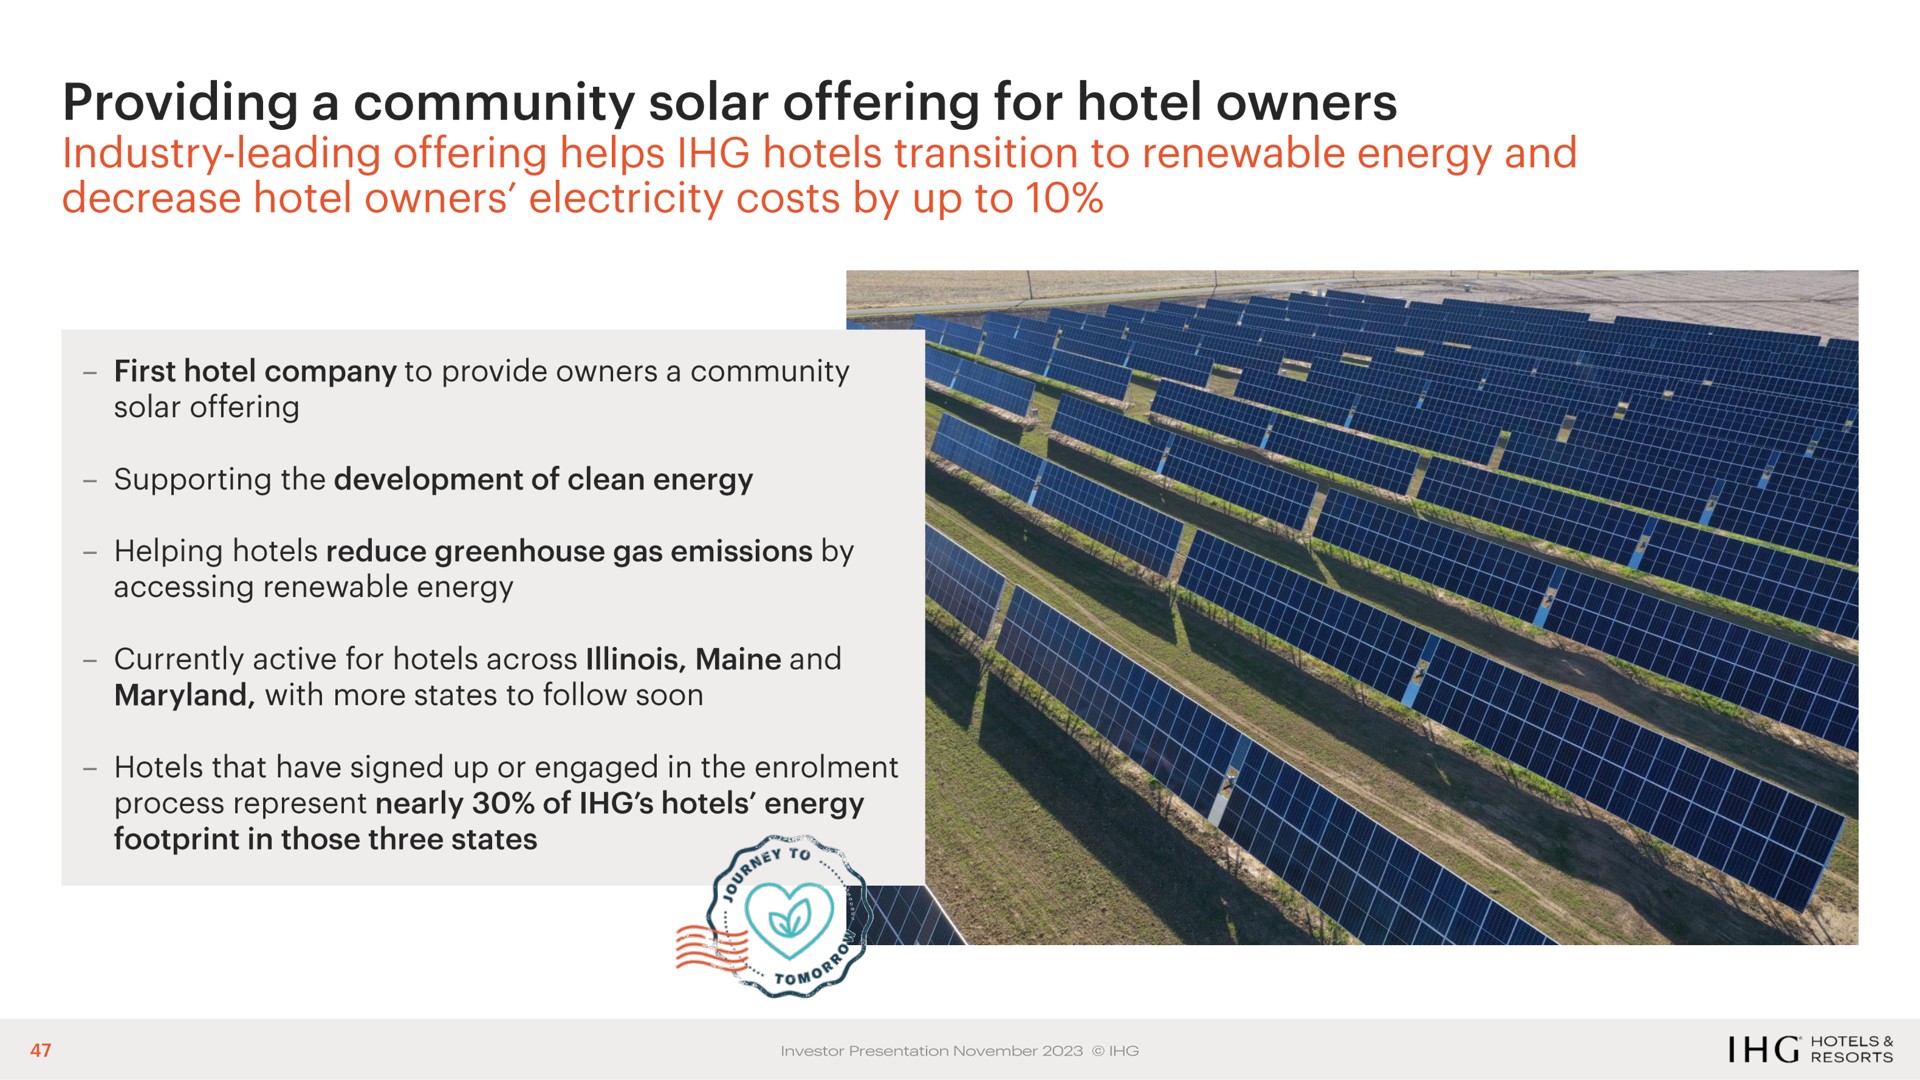 providing a community solar offering for hotel owners | IHG Hotels